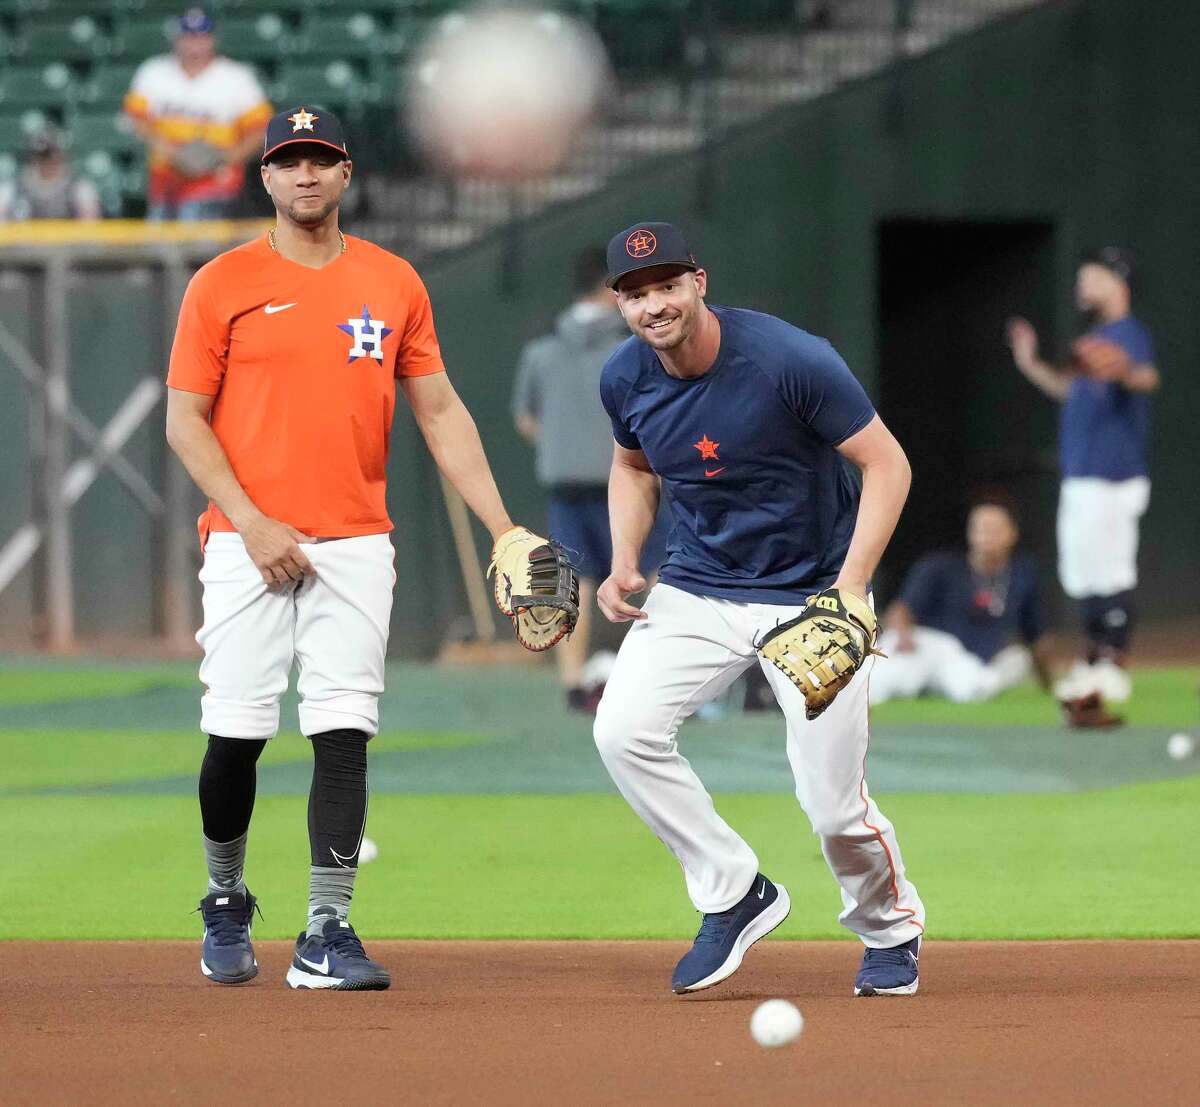 Houston Astros fans question deadline pickup Trey Mancini's recent  struggles: Idk what to even say at this point. He's just not getting  lucky, He looks lost almost in all at-bats